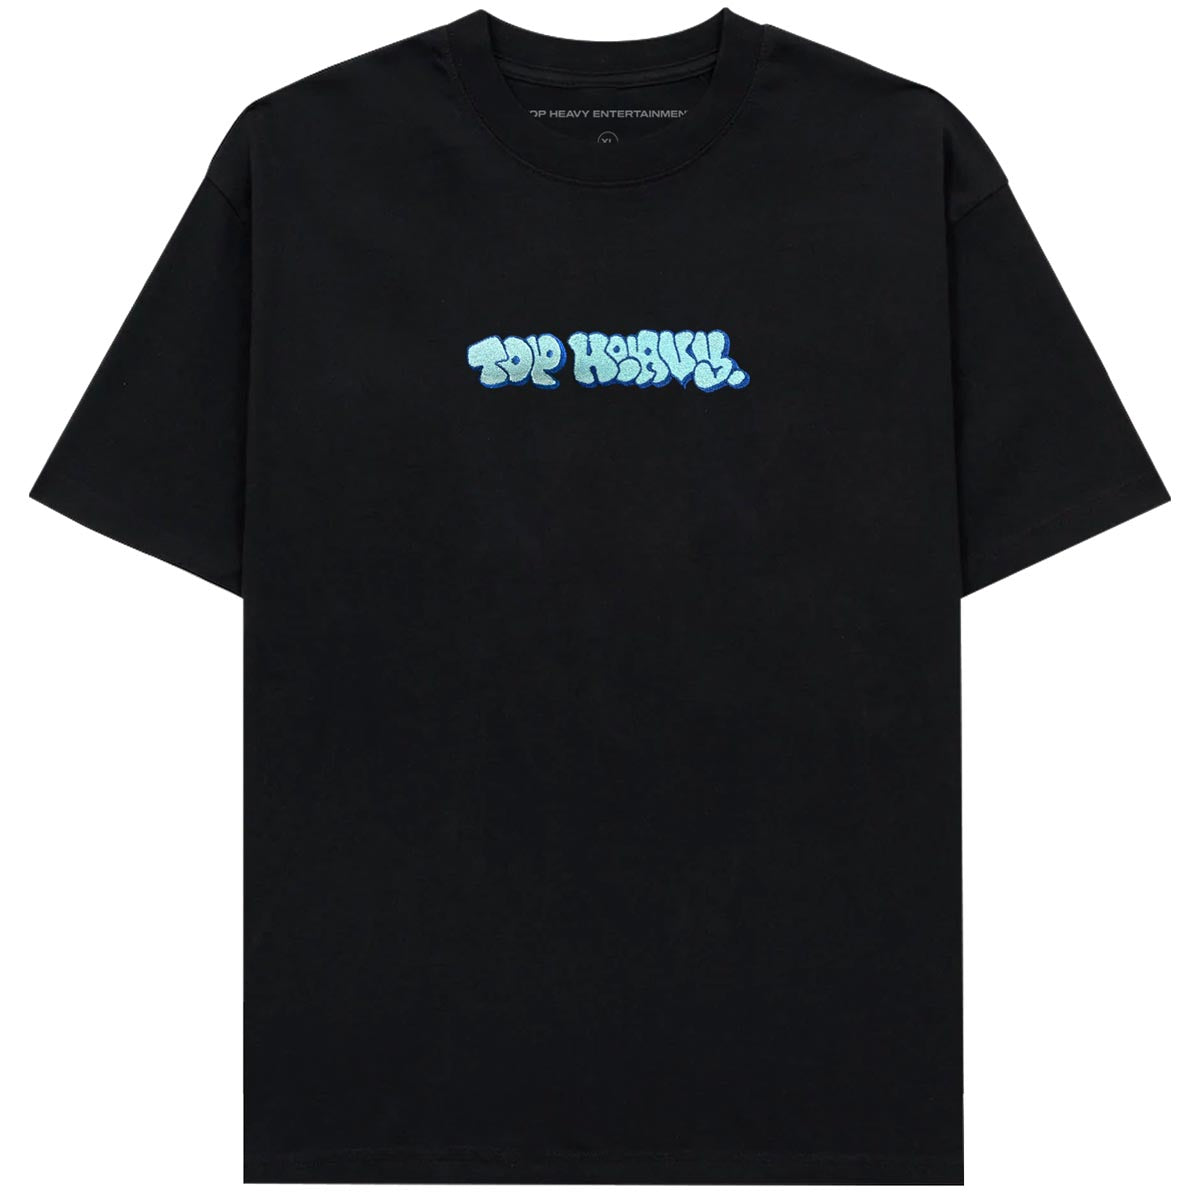 Top Heavy Throwie Embroidered T-Shirt - Black image 1